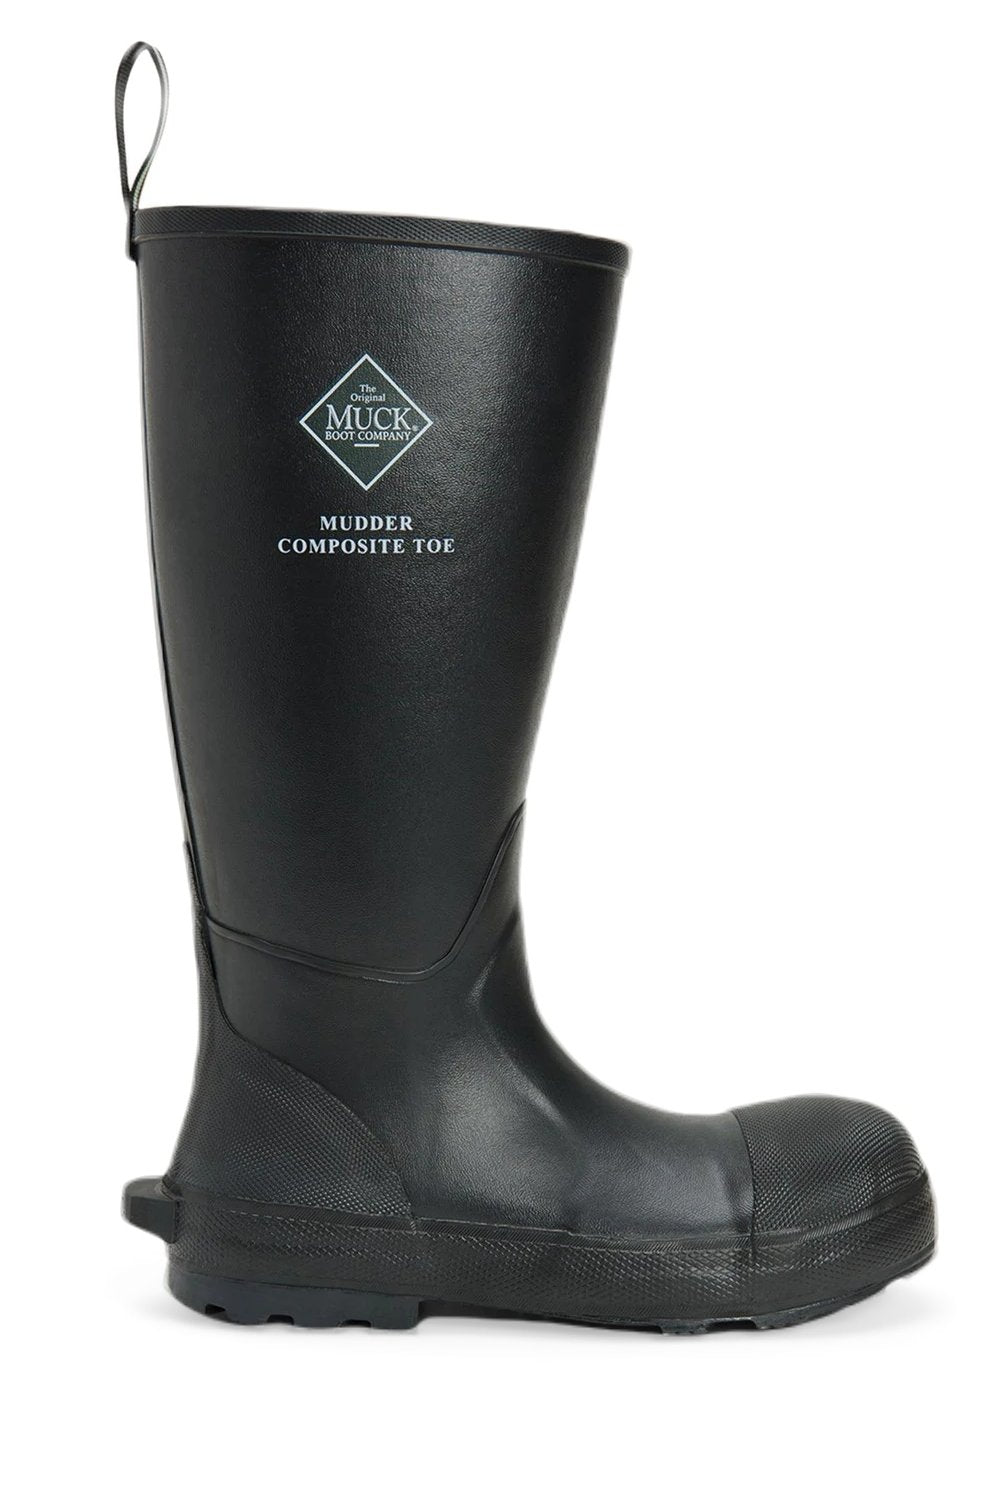 Muck Boots Unisex Mudder S5 Tall Boots in Black 